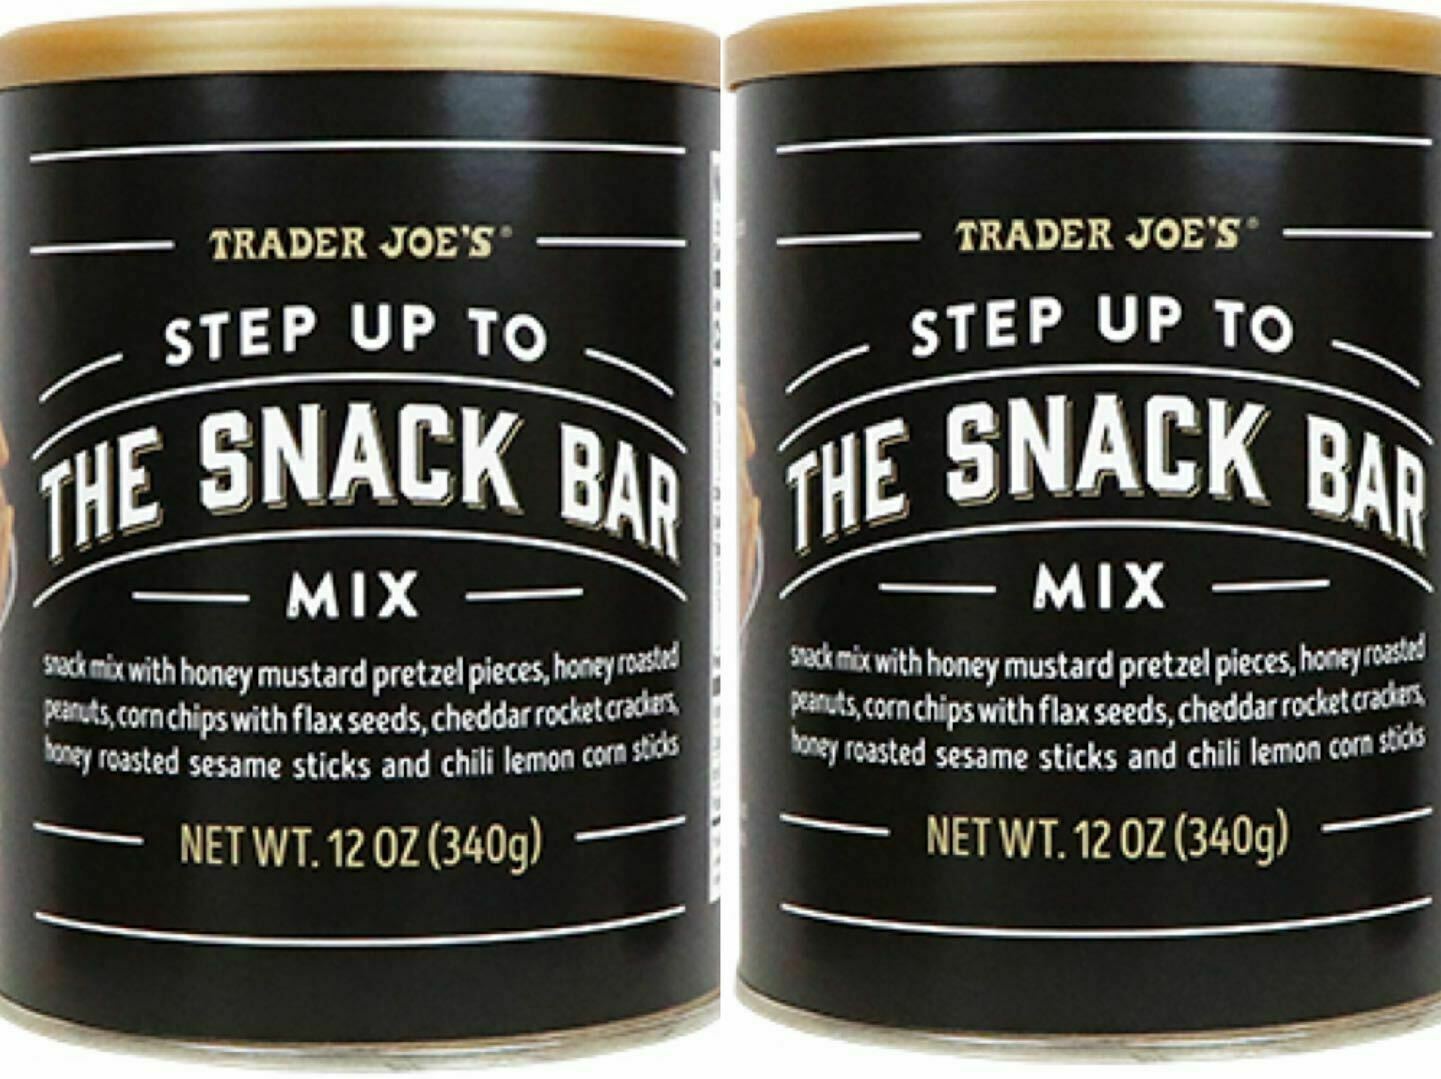 2 Packs Trader Joe's Step Up To The Snack Bar Mix 12 oz Each Pack, Total 24 oz